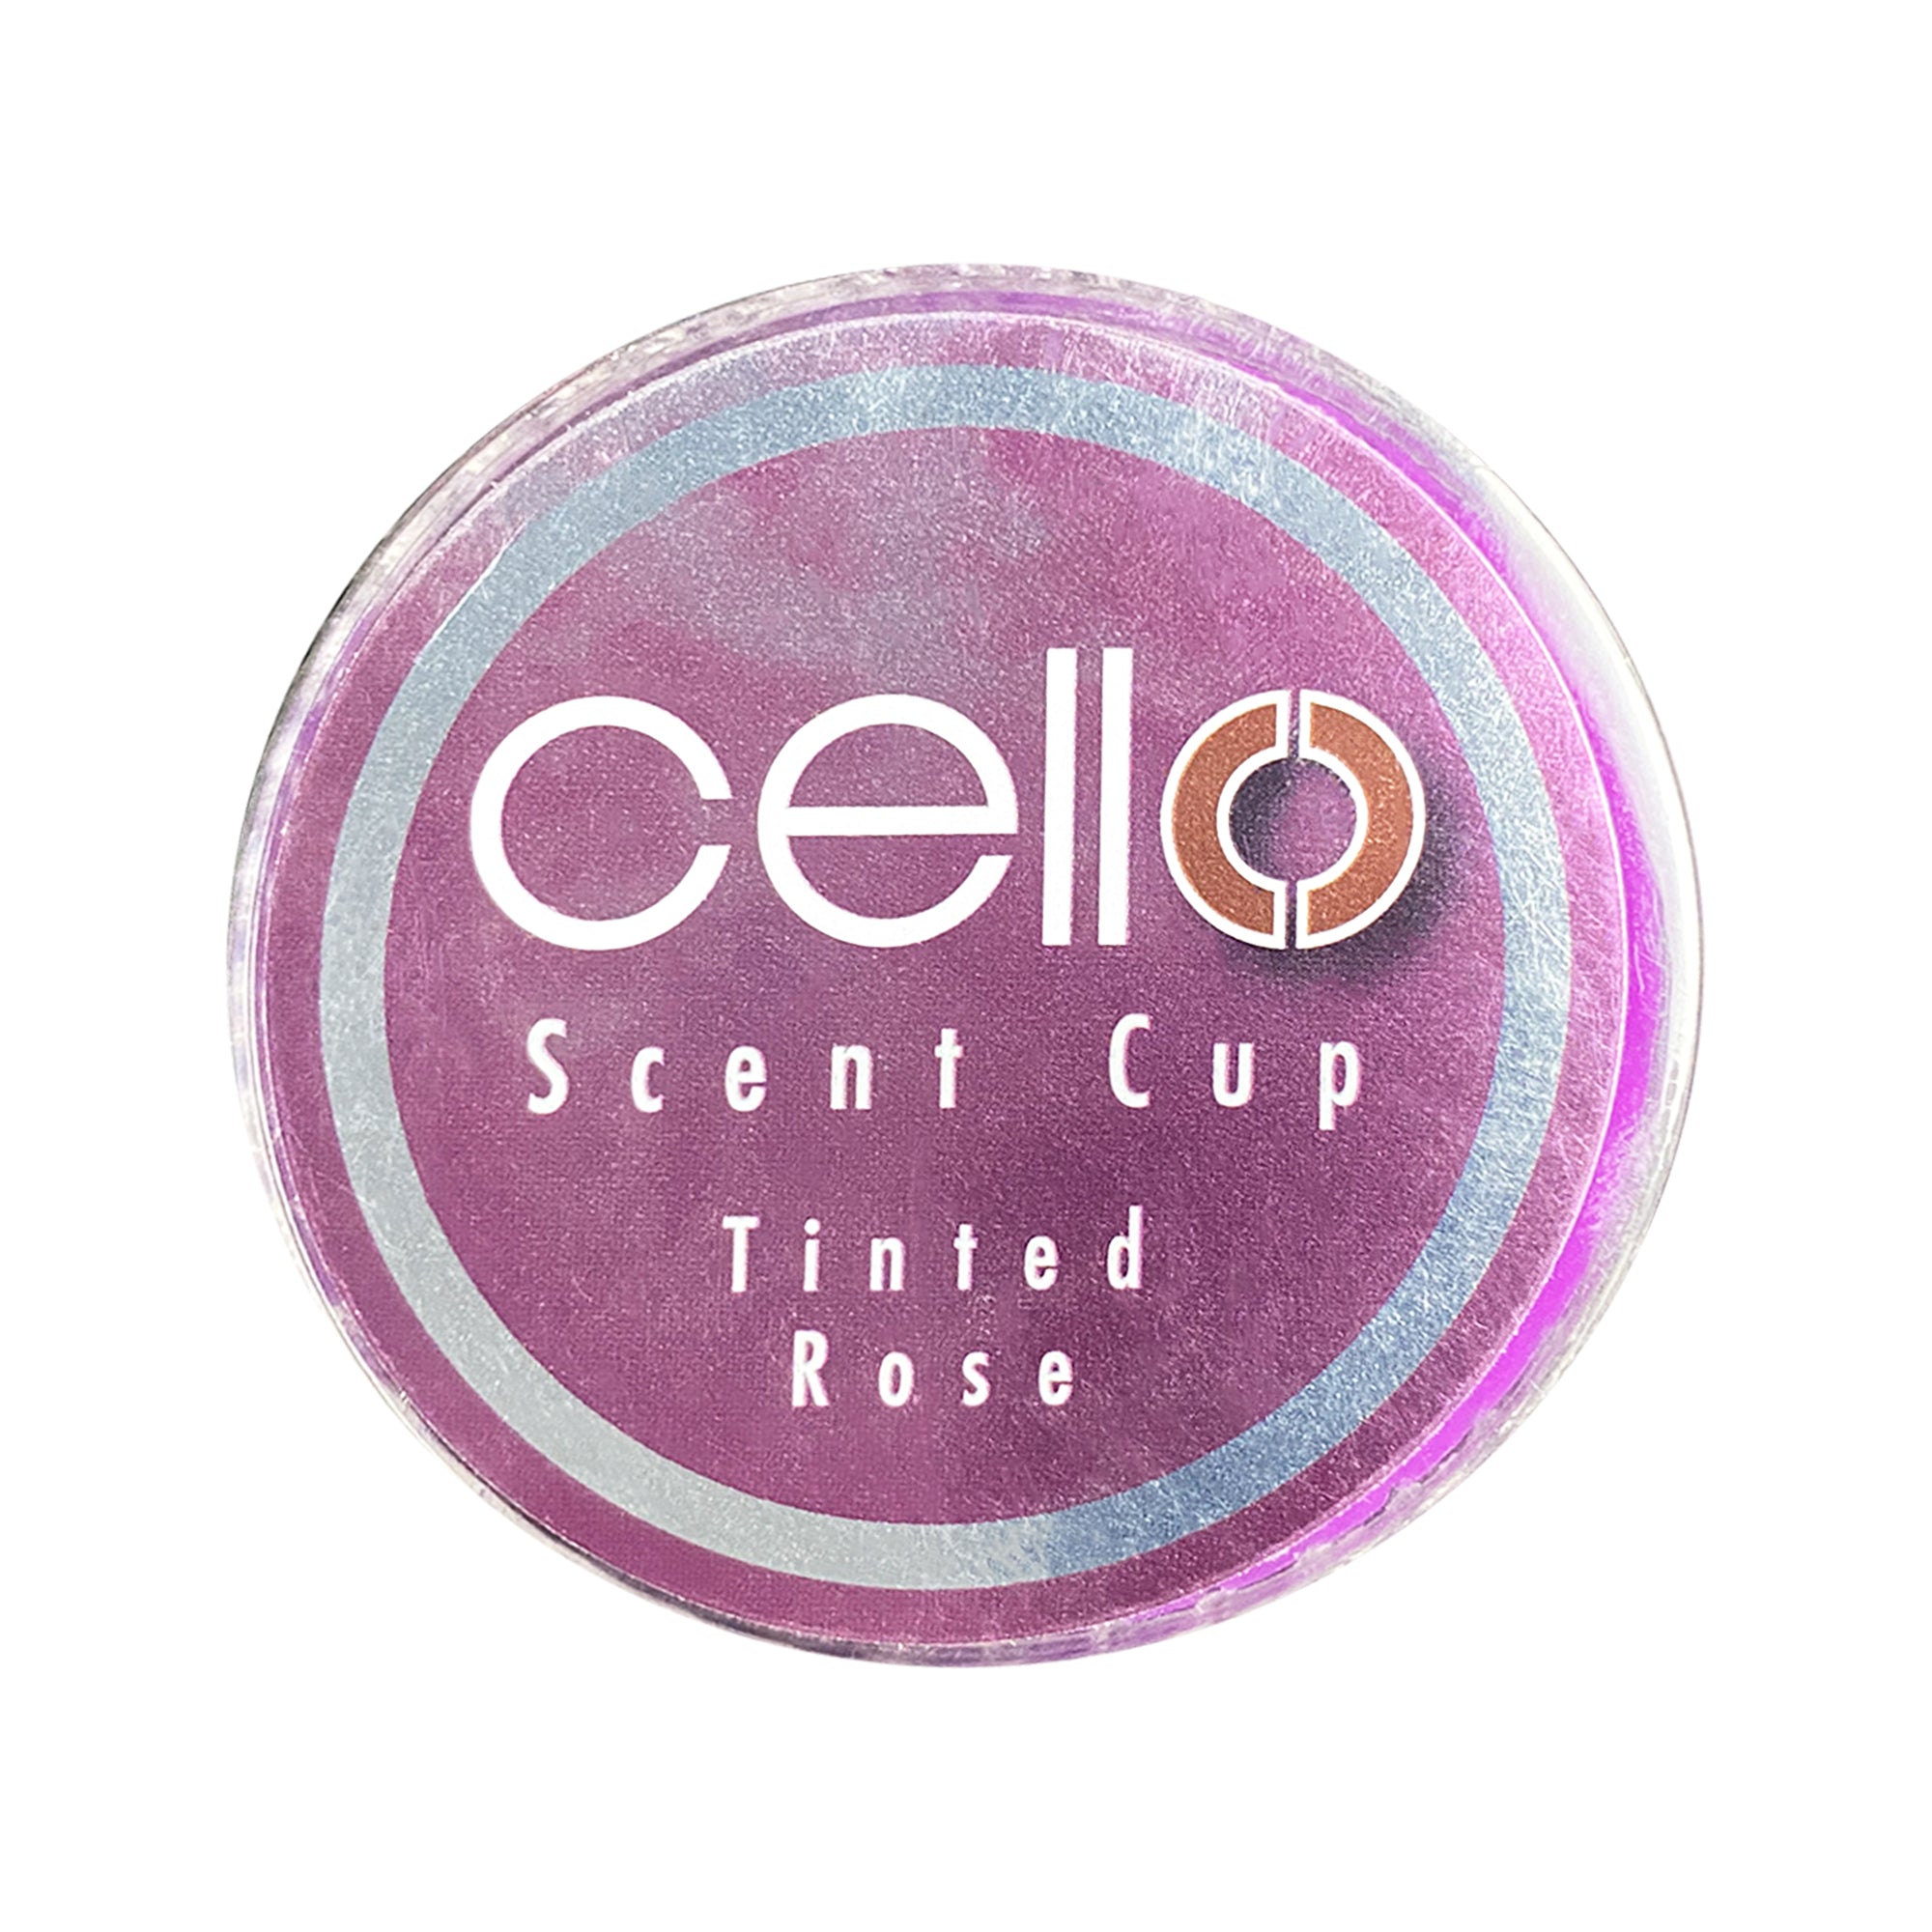 Cello - Scent Cup - Tinted Rose